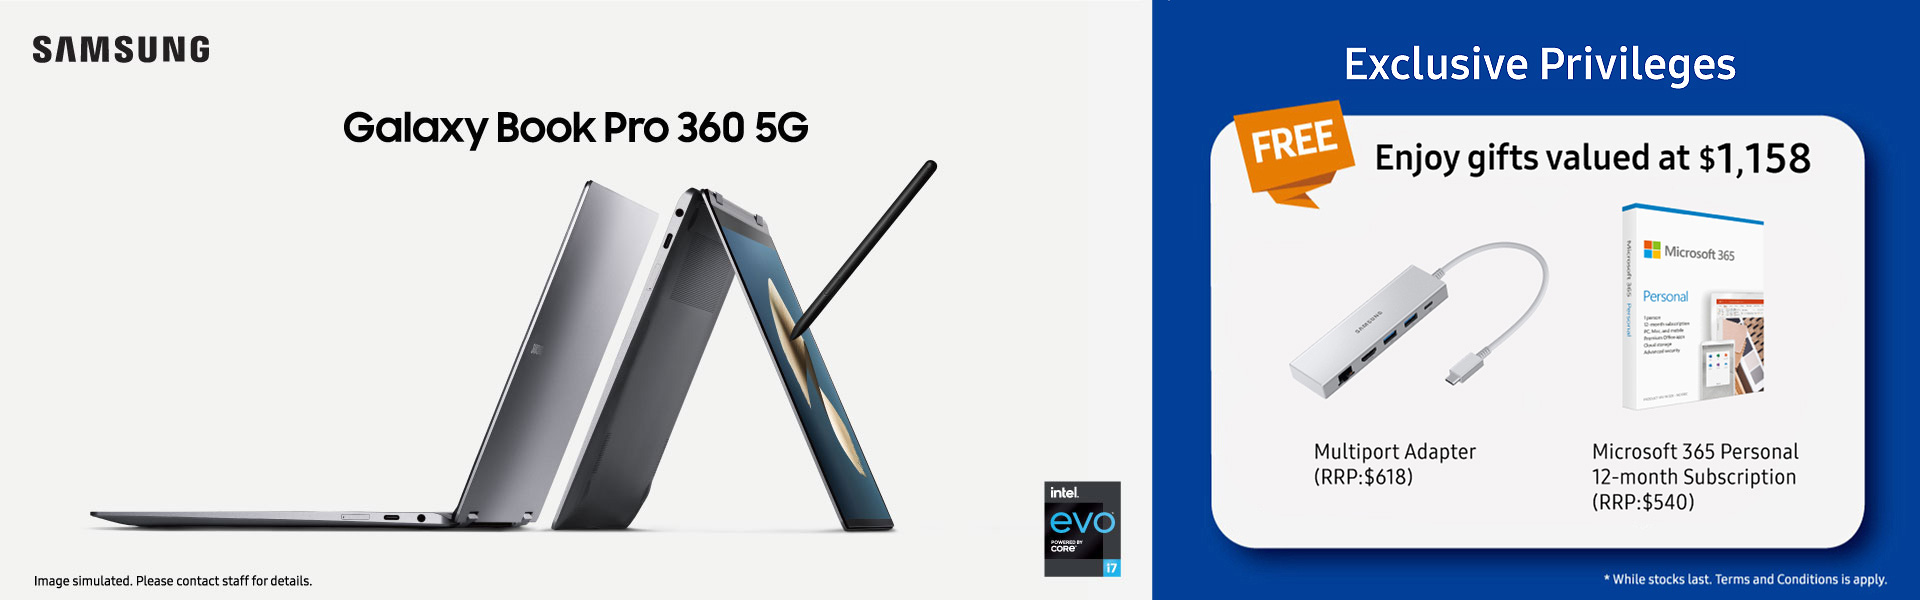 Up to $1,800 Standalone Discount upon 5G SIM subscription / contract. Free value $1,158 Gifts.